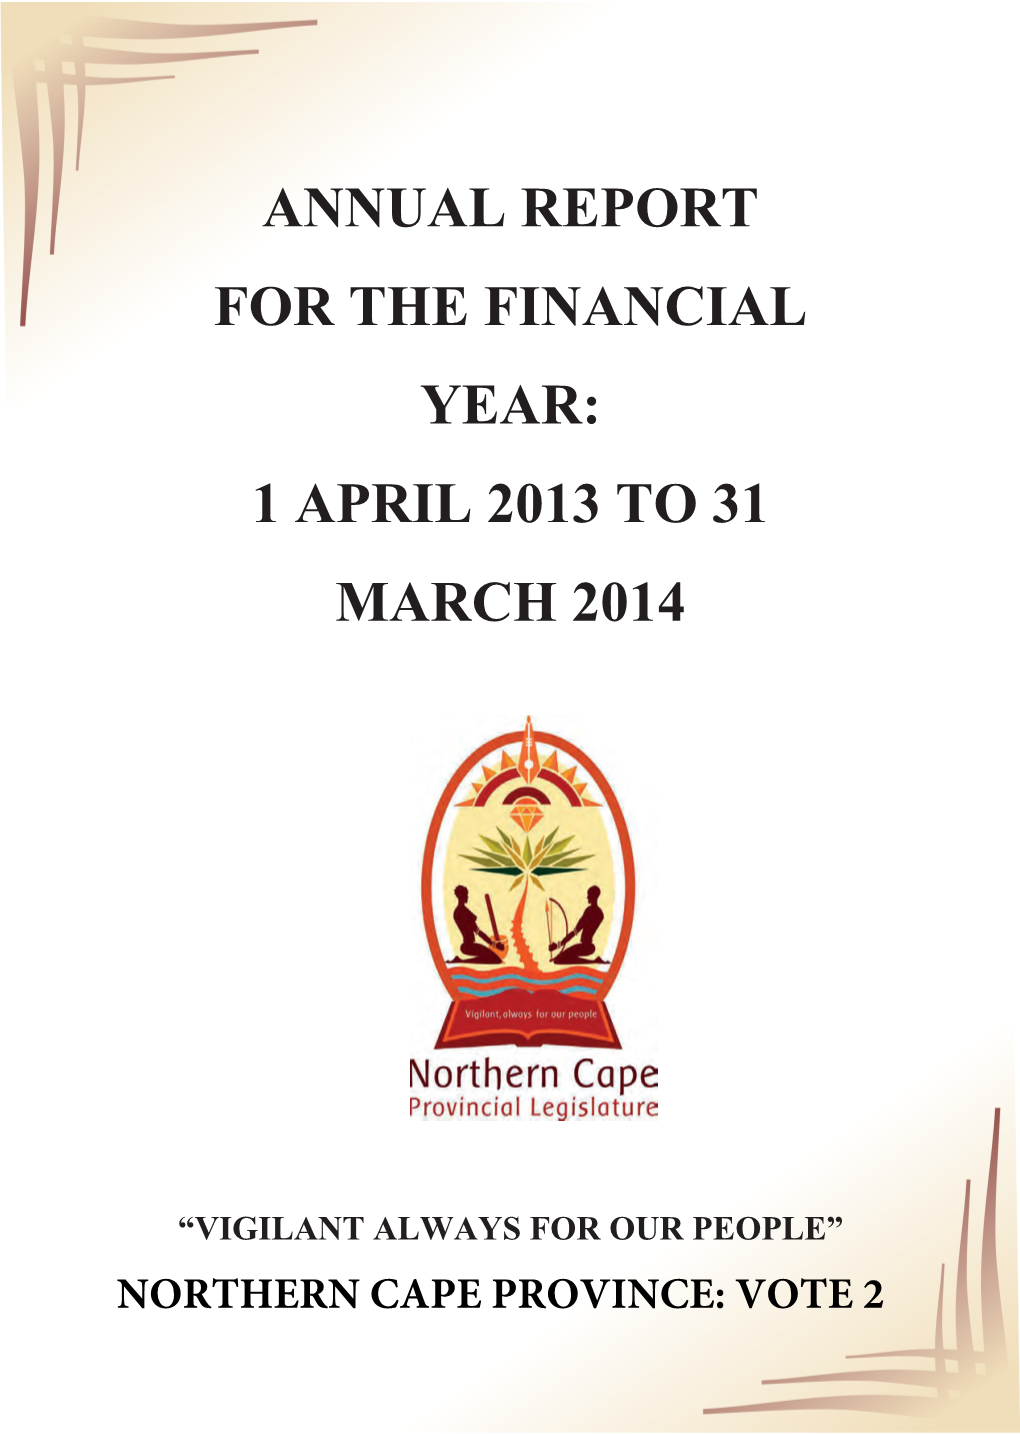 Annual Report for the Financial Year: 1 April 2013 to 31 March 2014